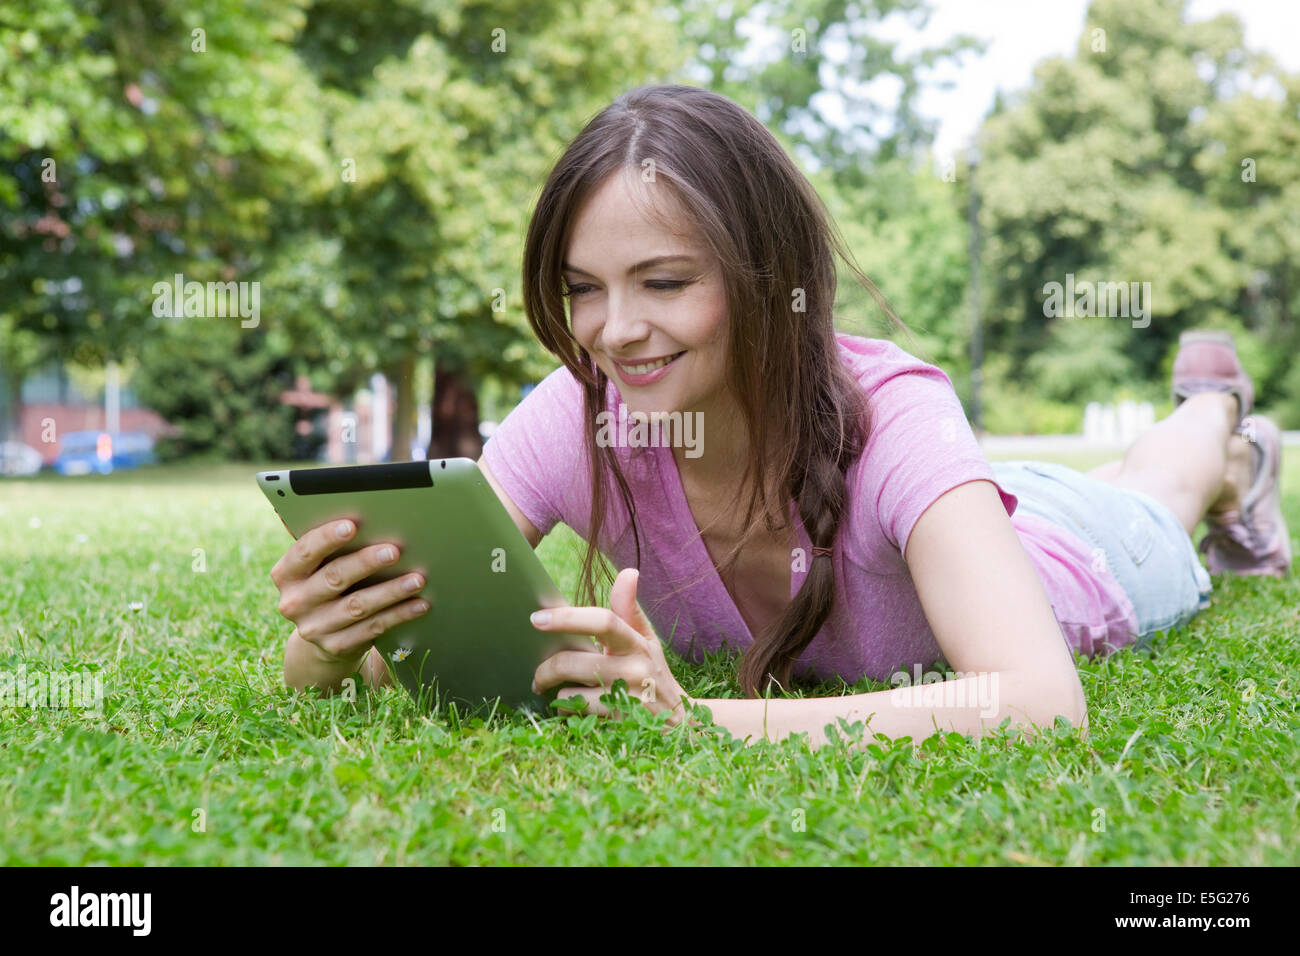 Woman with tablet computer Stock Photo